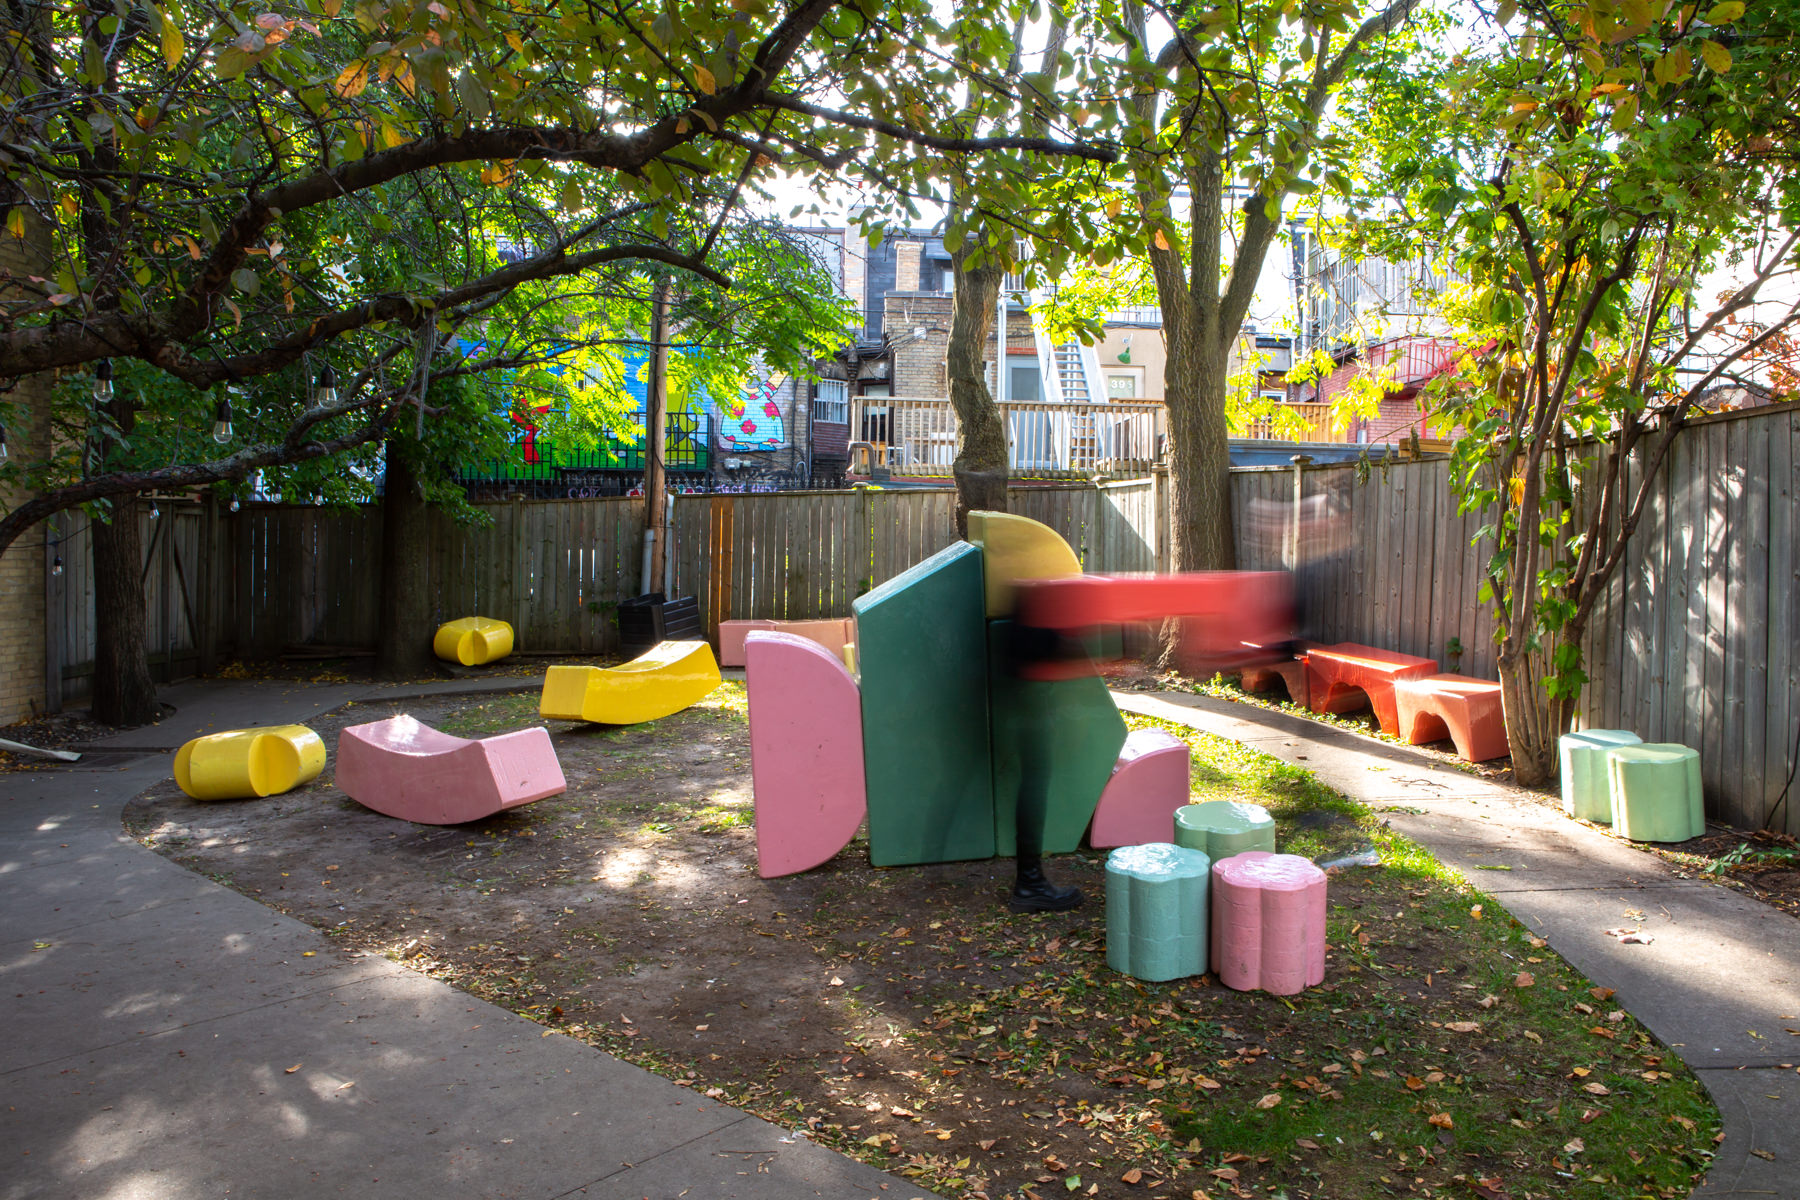 Wide-angle view of about 20 large-scale, colourful blocks from Cecil Community Planting Imagination project. 2 people are photographed moving quickly in front of the blocks.